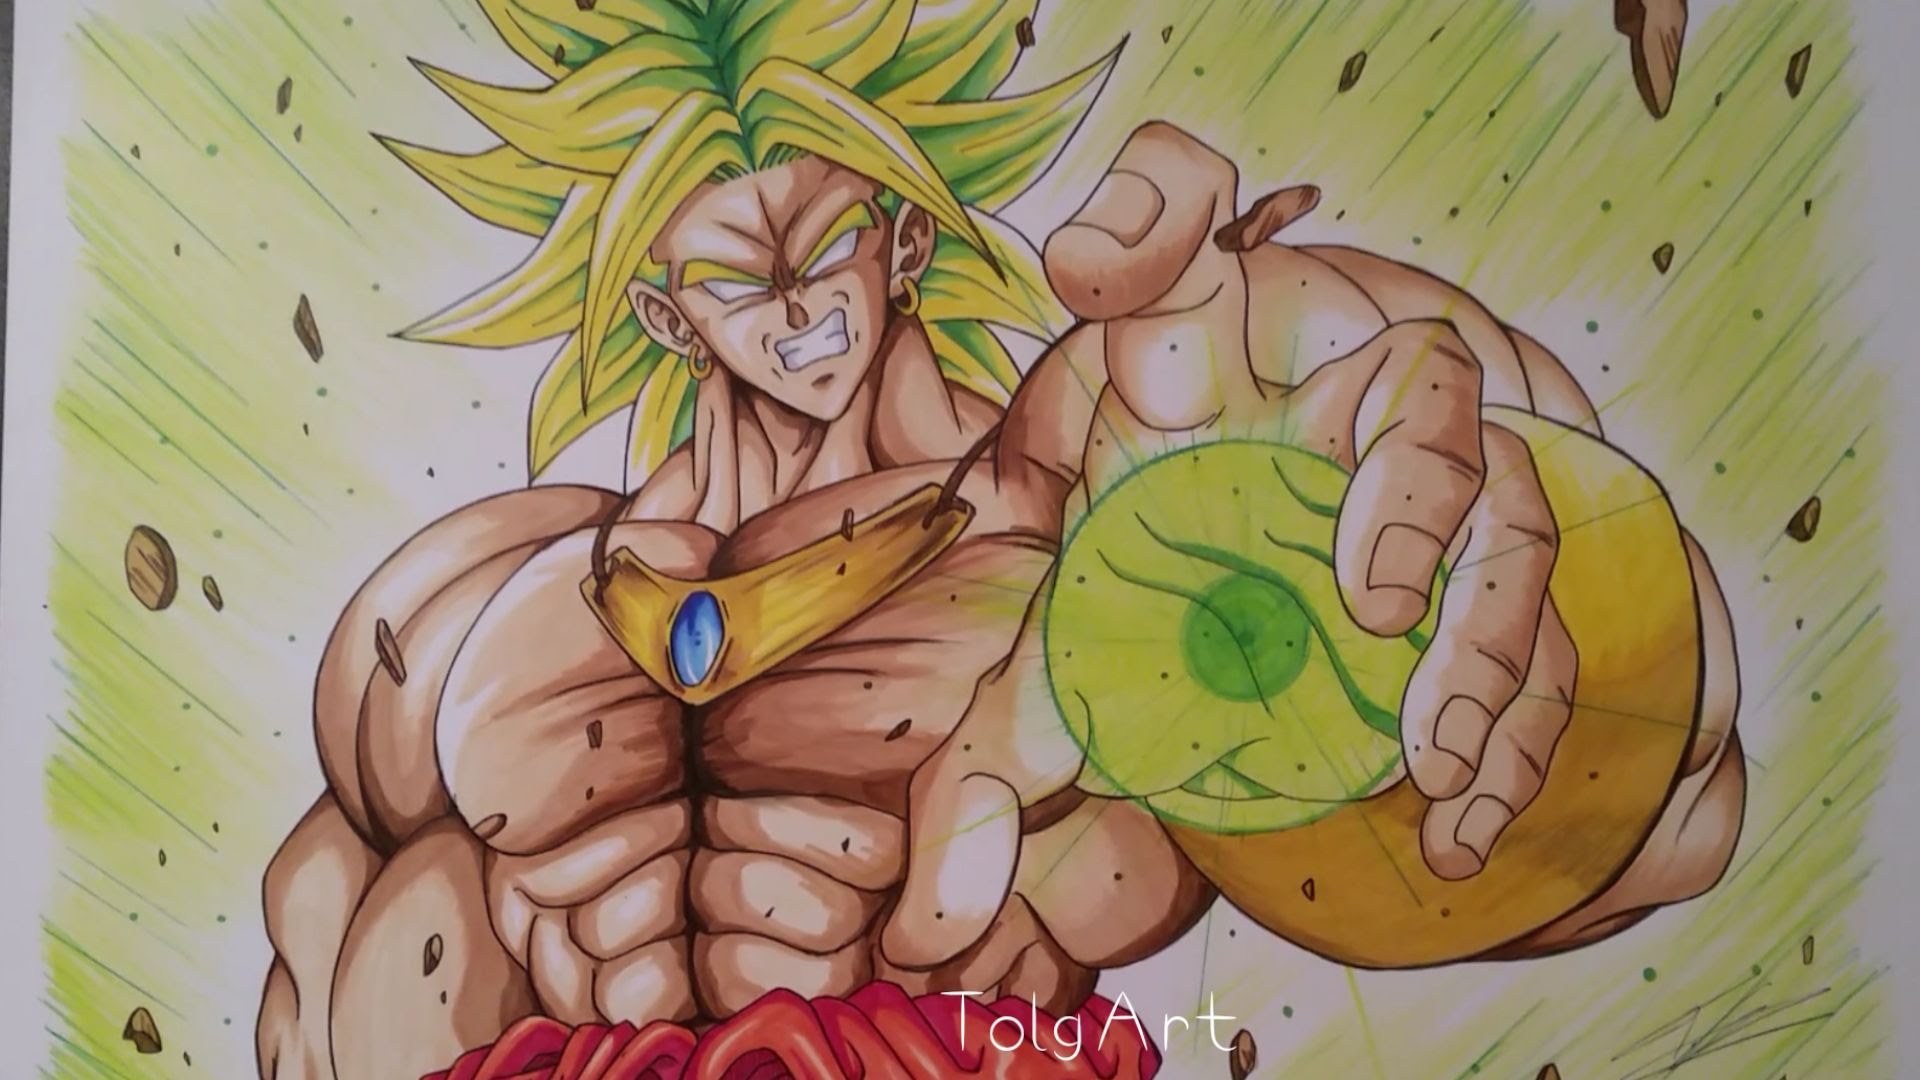 86. Found. drawing images for 'Broly'. 